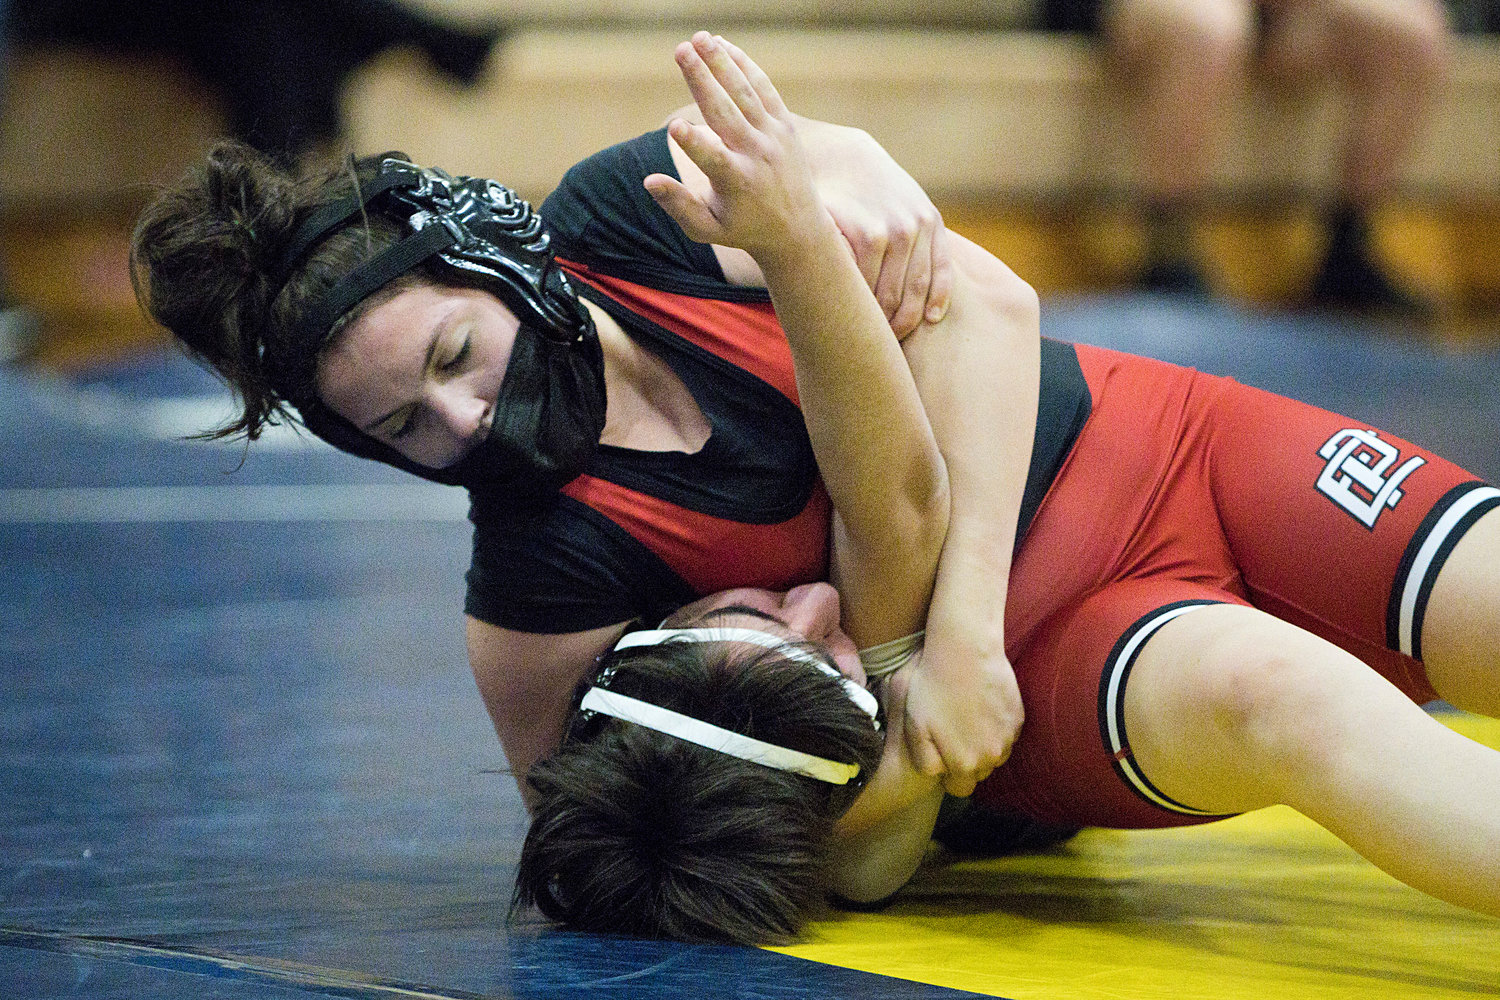 Ciara Nunes works to pin a Hendricken opponent while competing in the 132 weight class.